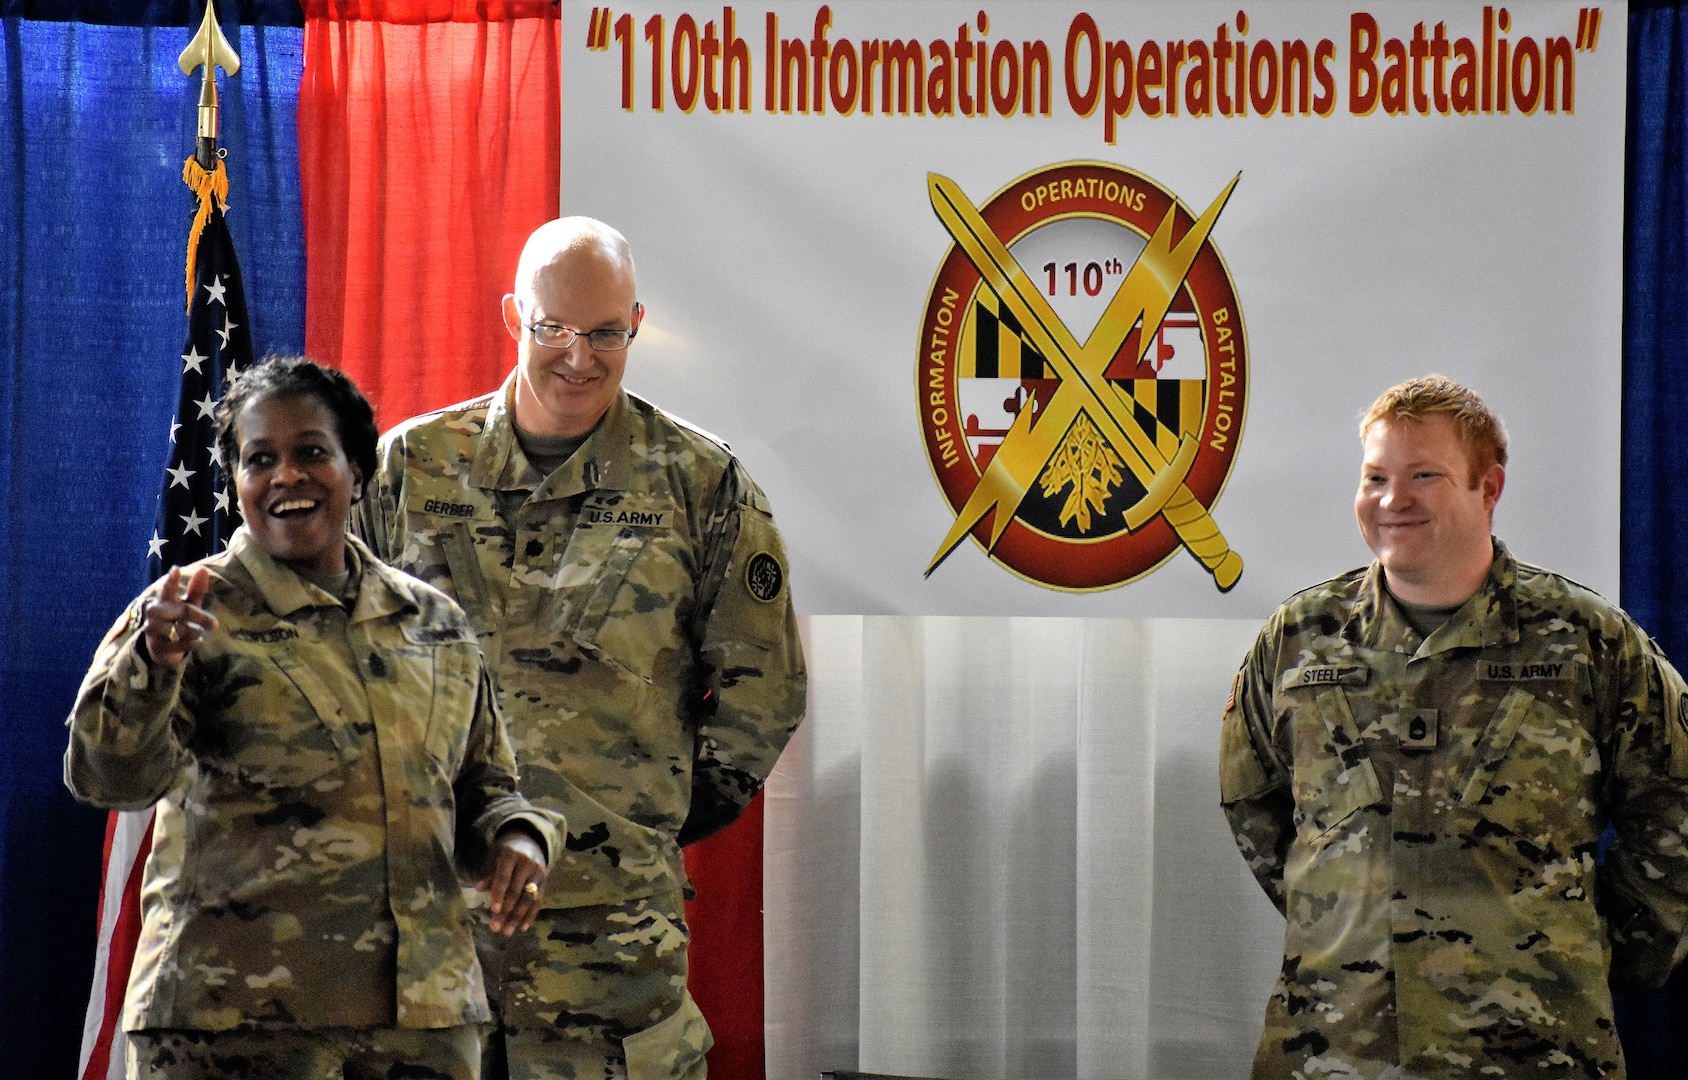 U.S. Army Sgt. 1st Class Quintin C. Steele, intelligence specialist, stands with Sgt. Maj. Perlisa D. Wilson, senior enlisted leader, and Lt. Col. Stephen P. Gerber, a senior intelligence officer, during a promotion ceremony at the 110th Information Operations Battalion Nov 18, 0218, in Annapolis, Md. Steele's promotion speech sparked an emotional expression of gratitude to his unit for the support he received as his family lived through the devastation of Hurricane Michael in Panama City, Fla.